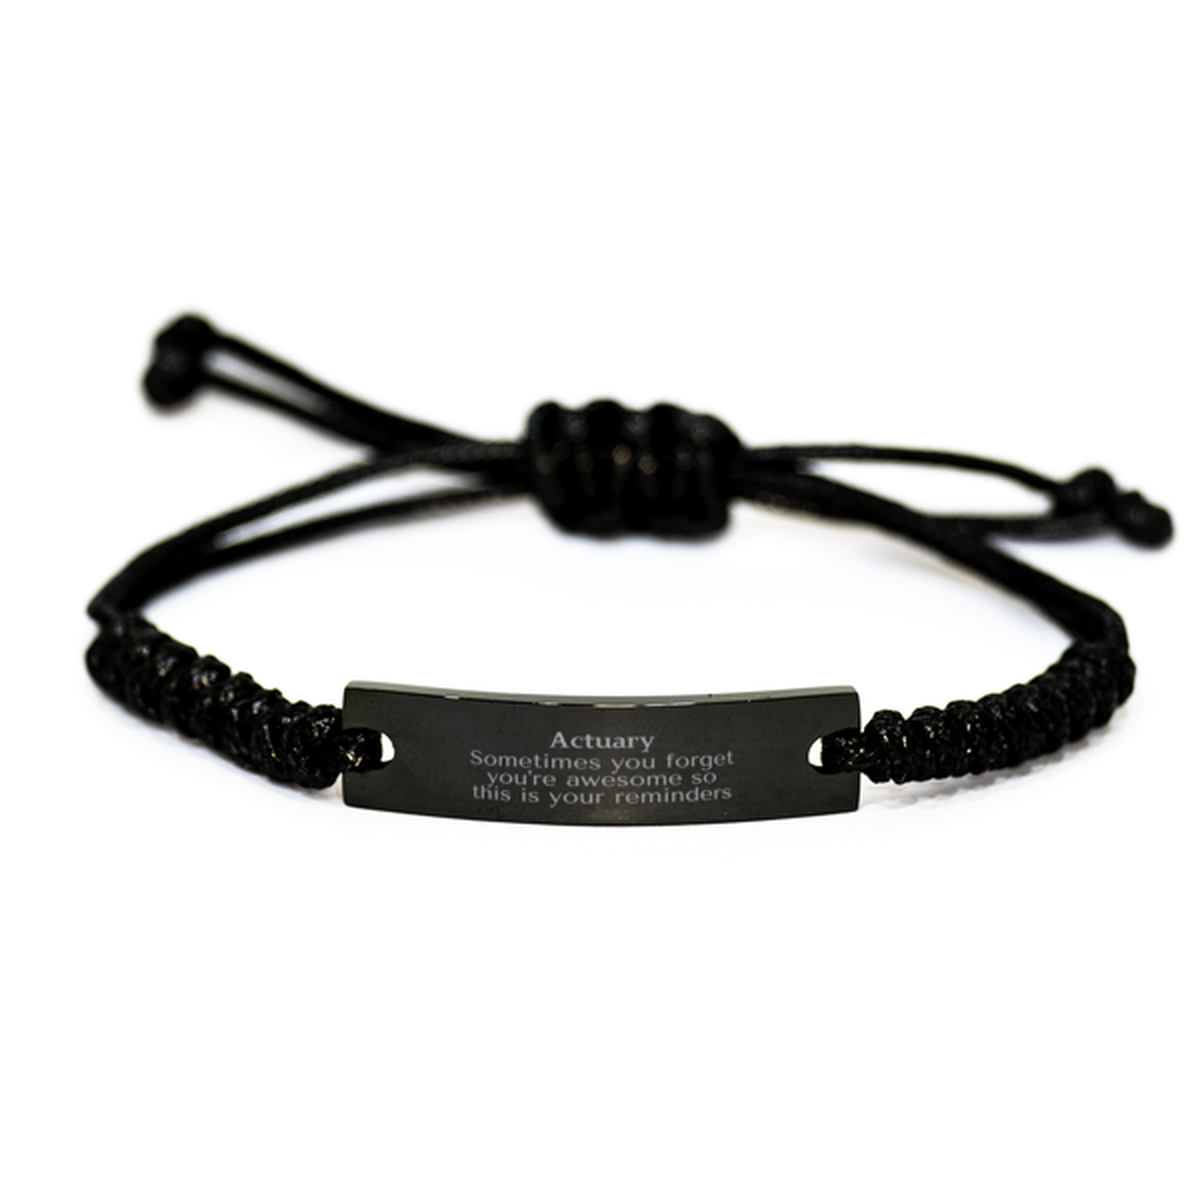 Sentimental Actuary Black Rope Bracelet, Actuary Sometimes you forget you're awesome so this is your reminders, Graduation Christmas Birthday Gifts for Actuary, Men, Women, Coworkers